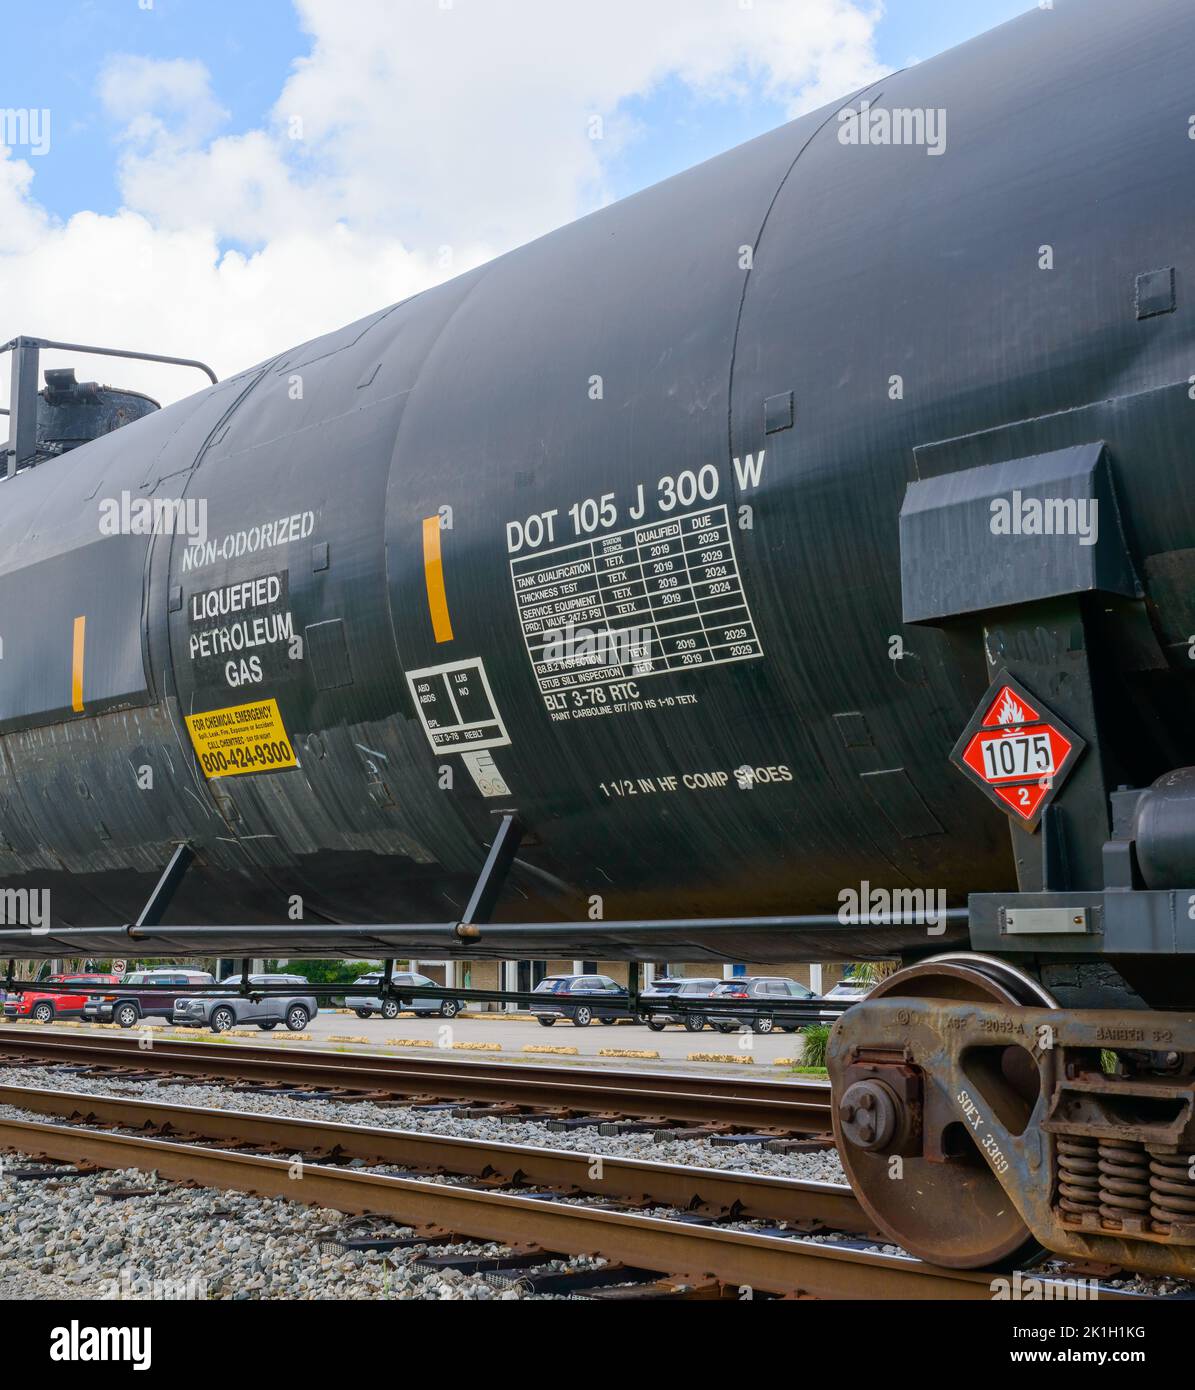 NEW ORLEANS, LA, USA - SEPTEMBER 17, 2022: Railroad car transporting liquefied petroleum gas and displaying class 2 flammable hazardous materials sign Stock Photo